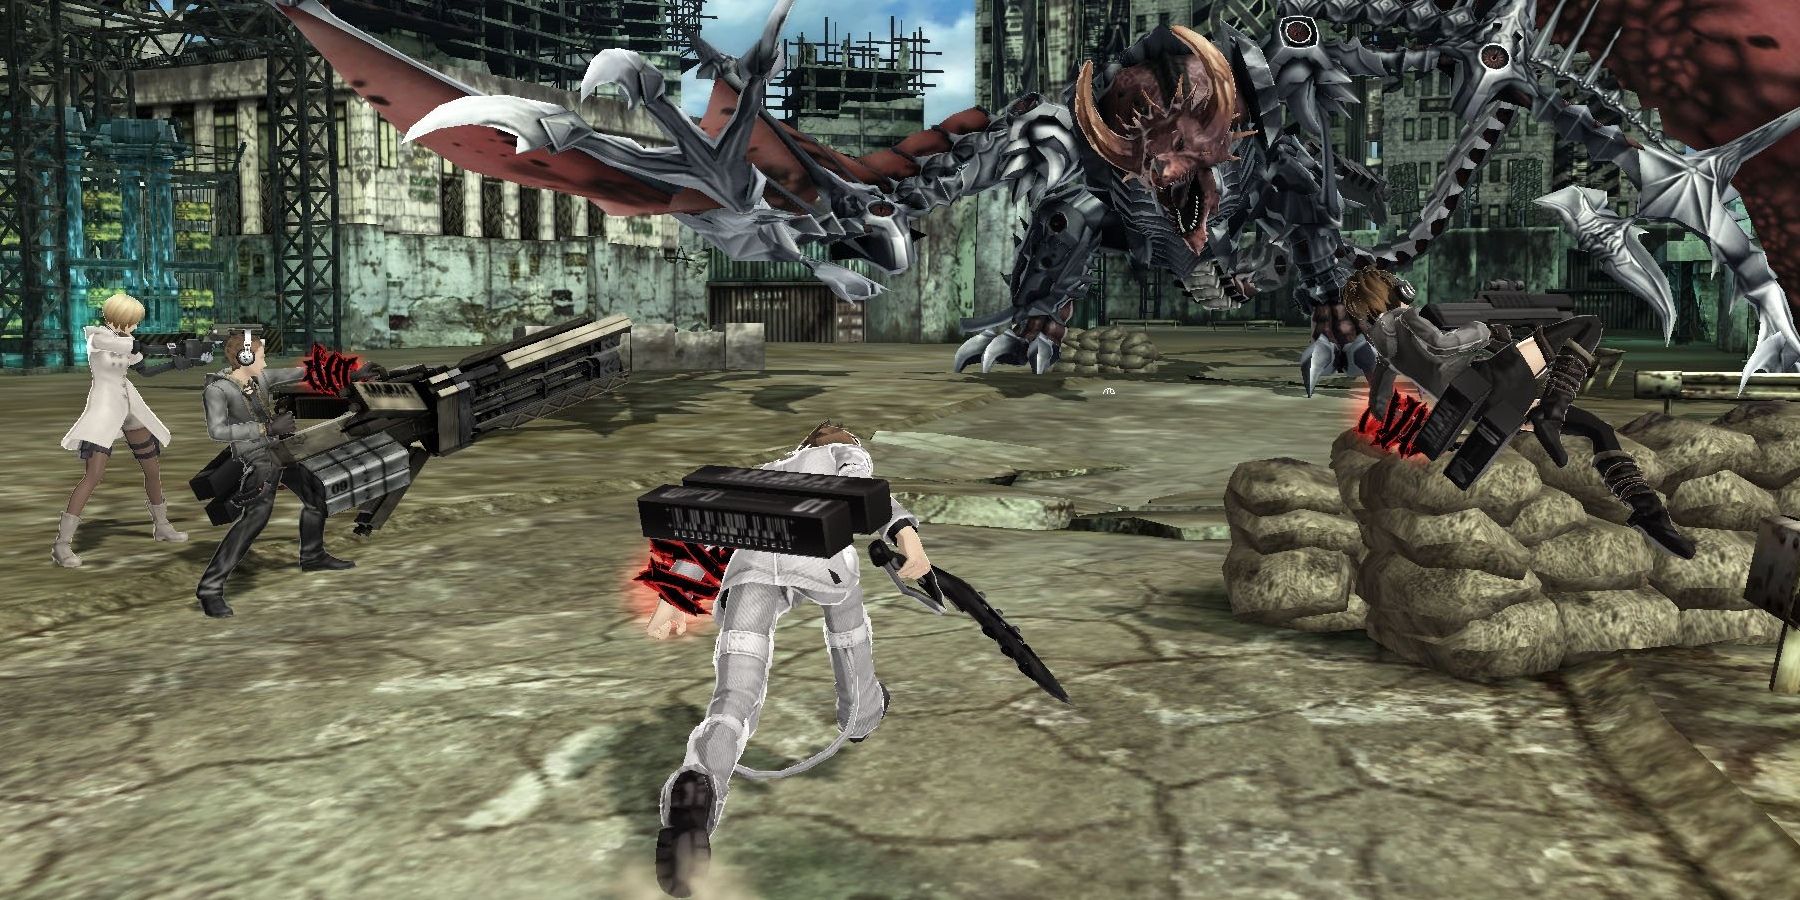 Characters with guns attacking monsters in a city.